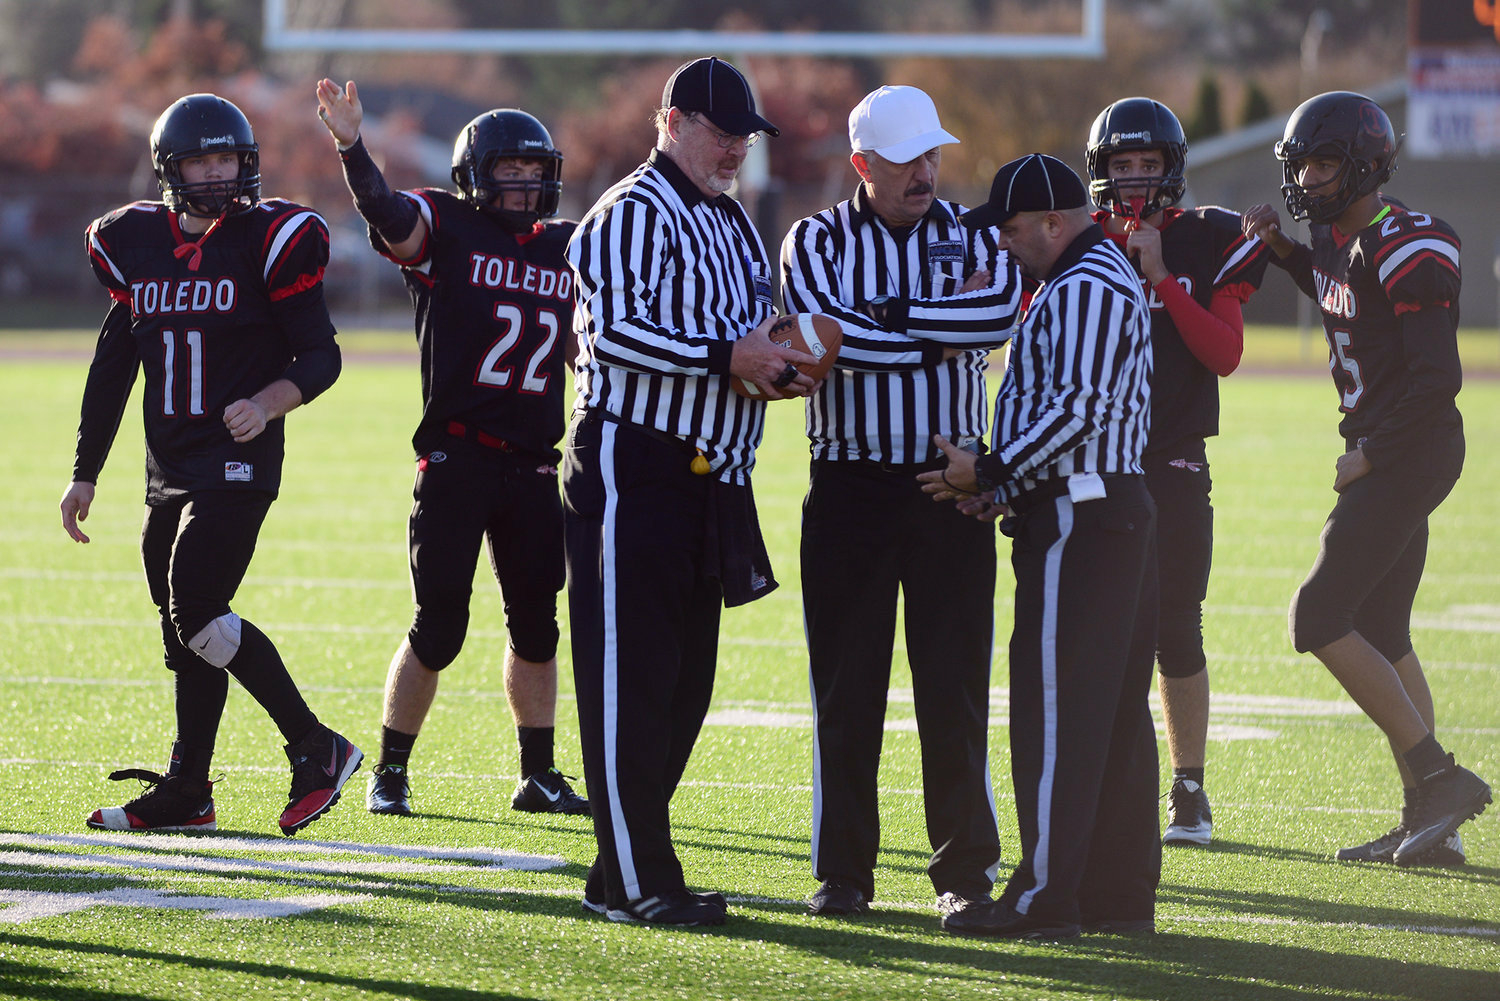 Referee shortages in Oregon impacting high school sports